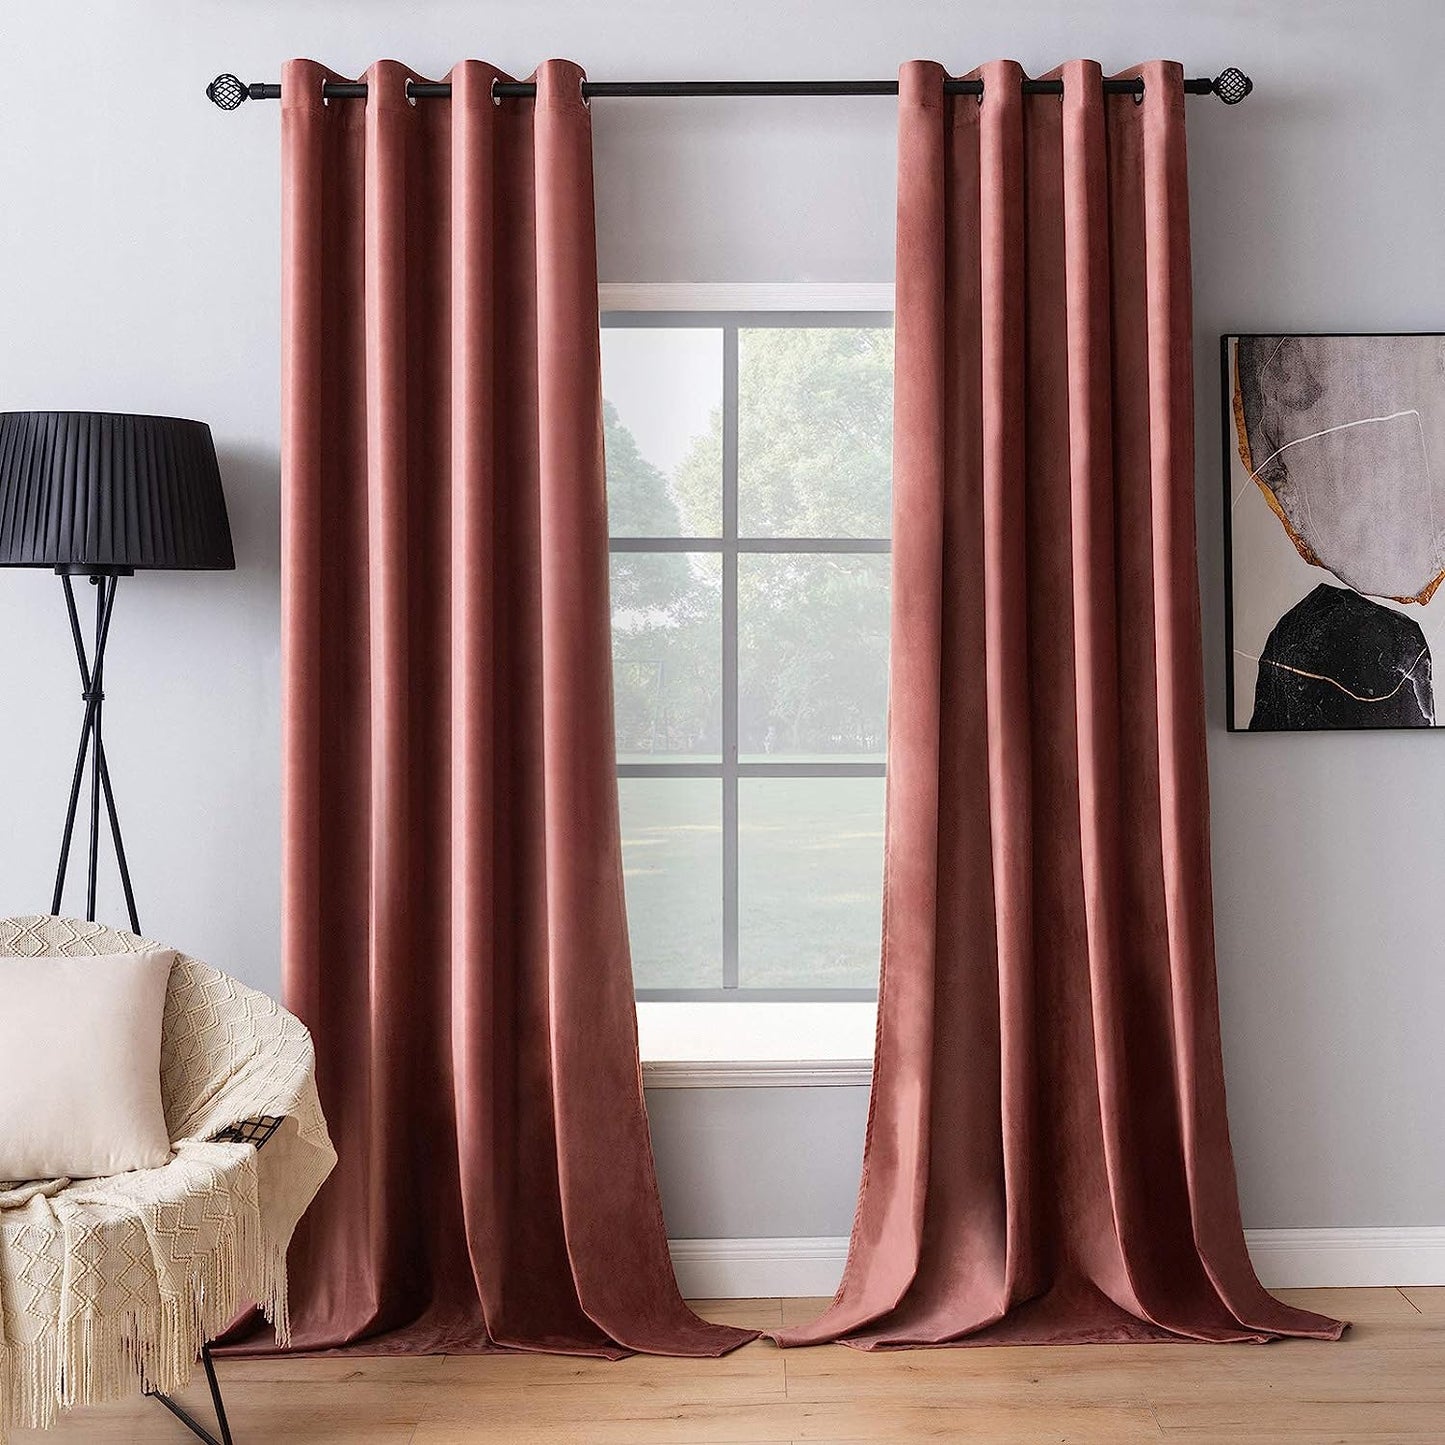 MIULEE Velvet Curtains Olive Green Elegant Grommet Curtains Thermal Insulated Soundproof Room Darkening Curtains/Drapes for Classical Living Room Bedroom Decor 52 X 84 Inch Set of 2  MIULEE Dusty Rose W52 X L96 